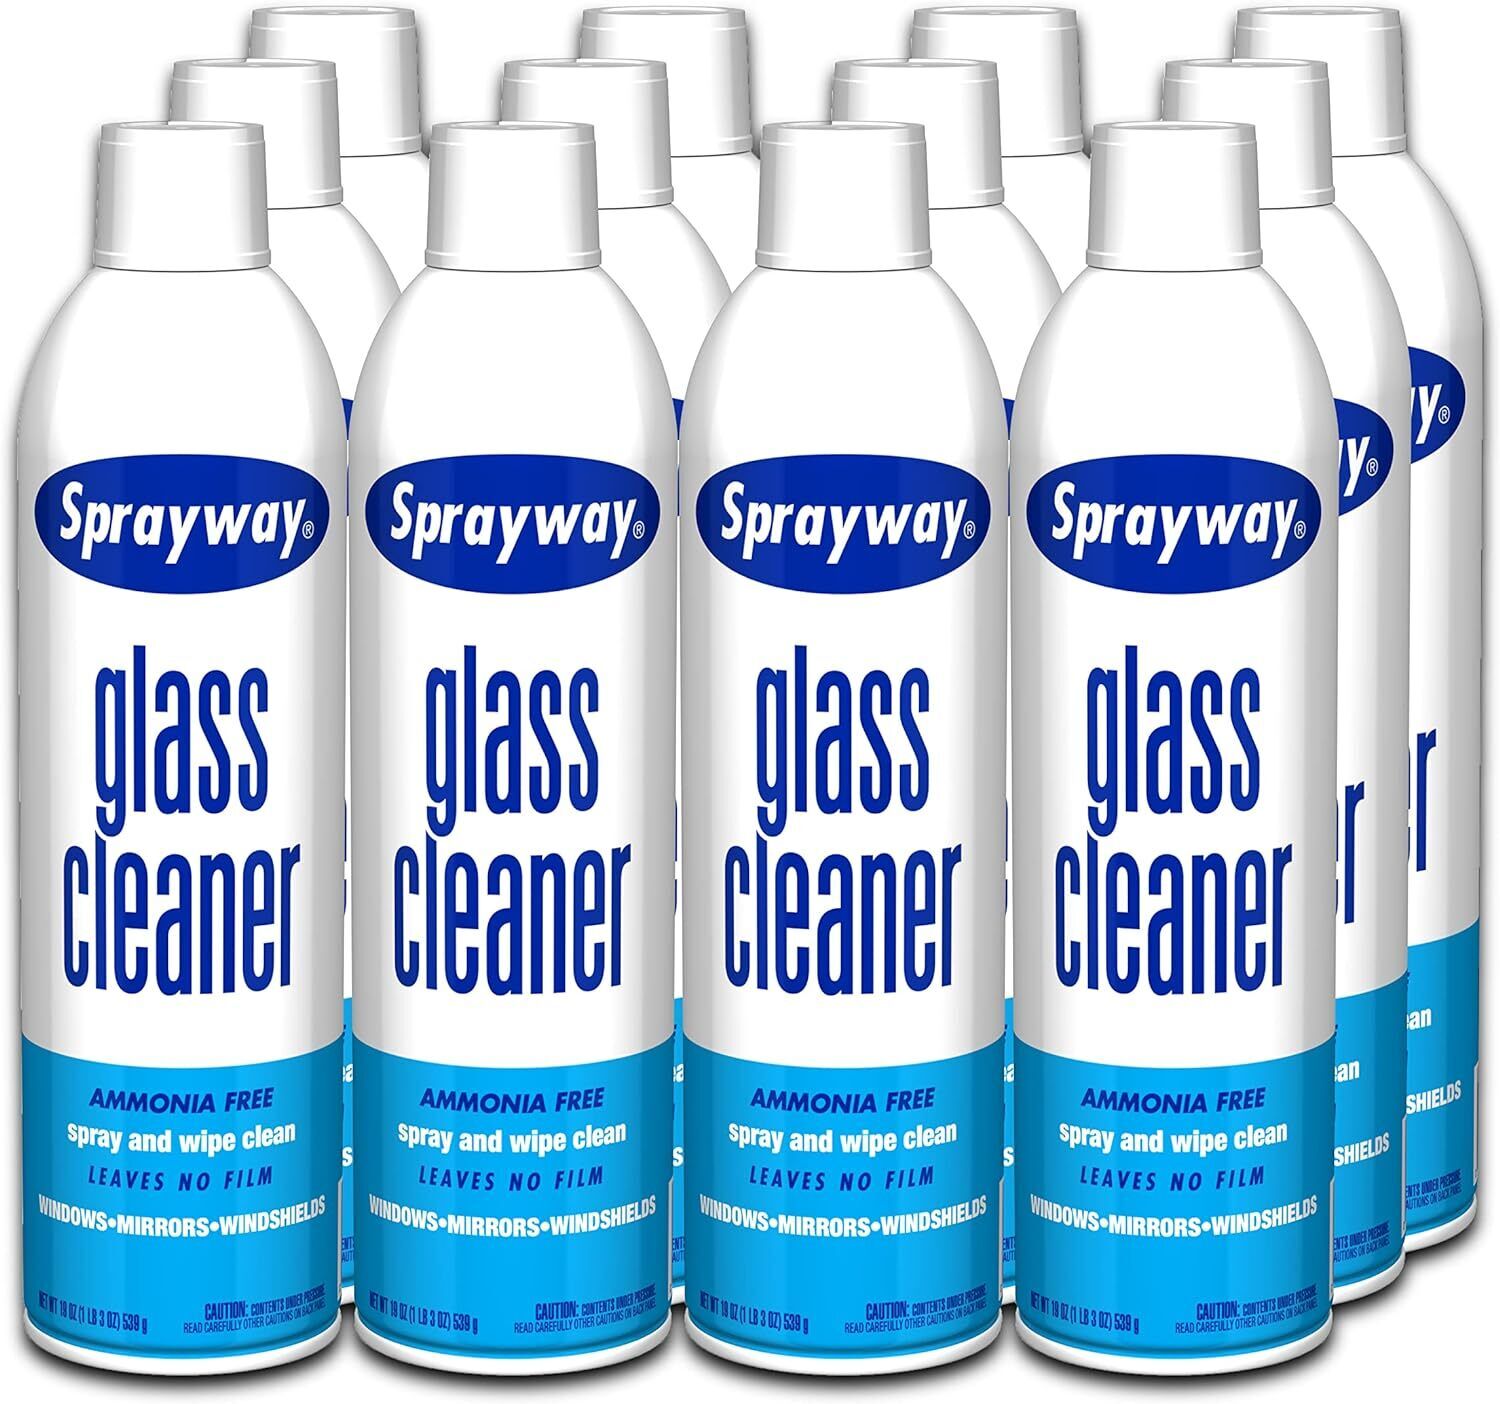 Sprayway Glass Cleaner with Foaming Spray for a 1.19 Pound (Pack of 12) 